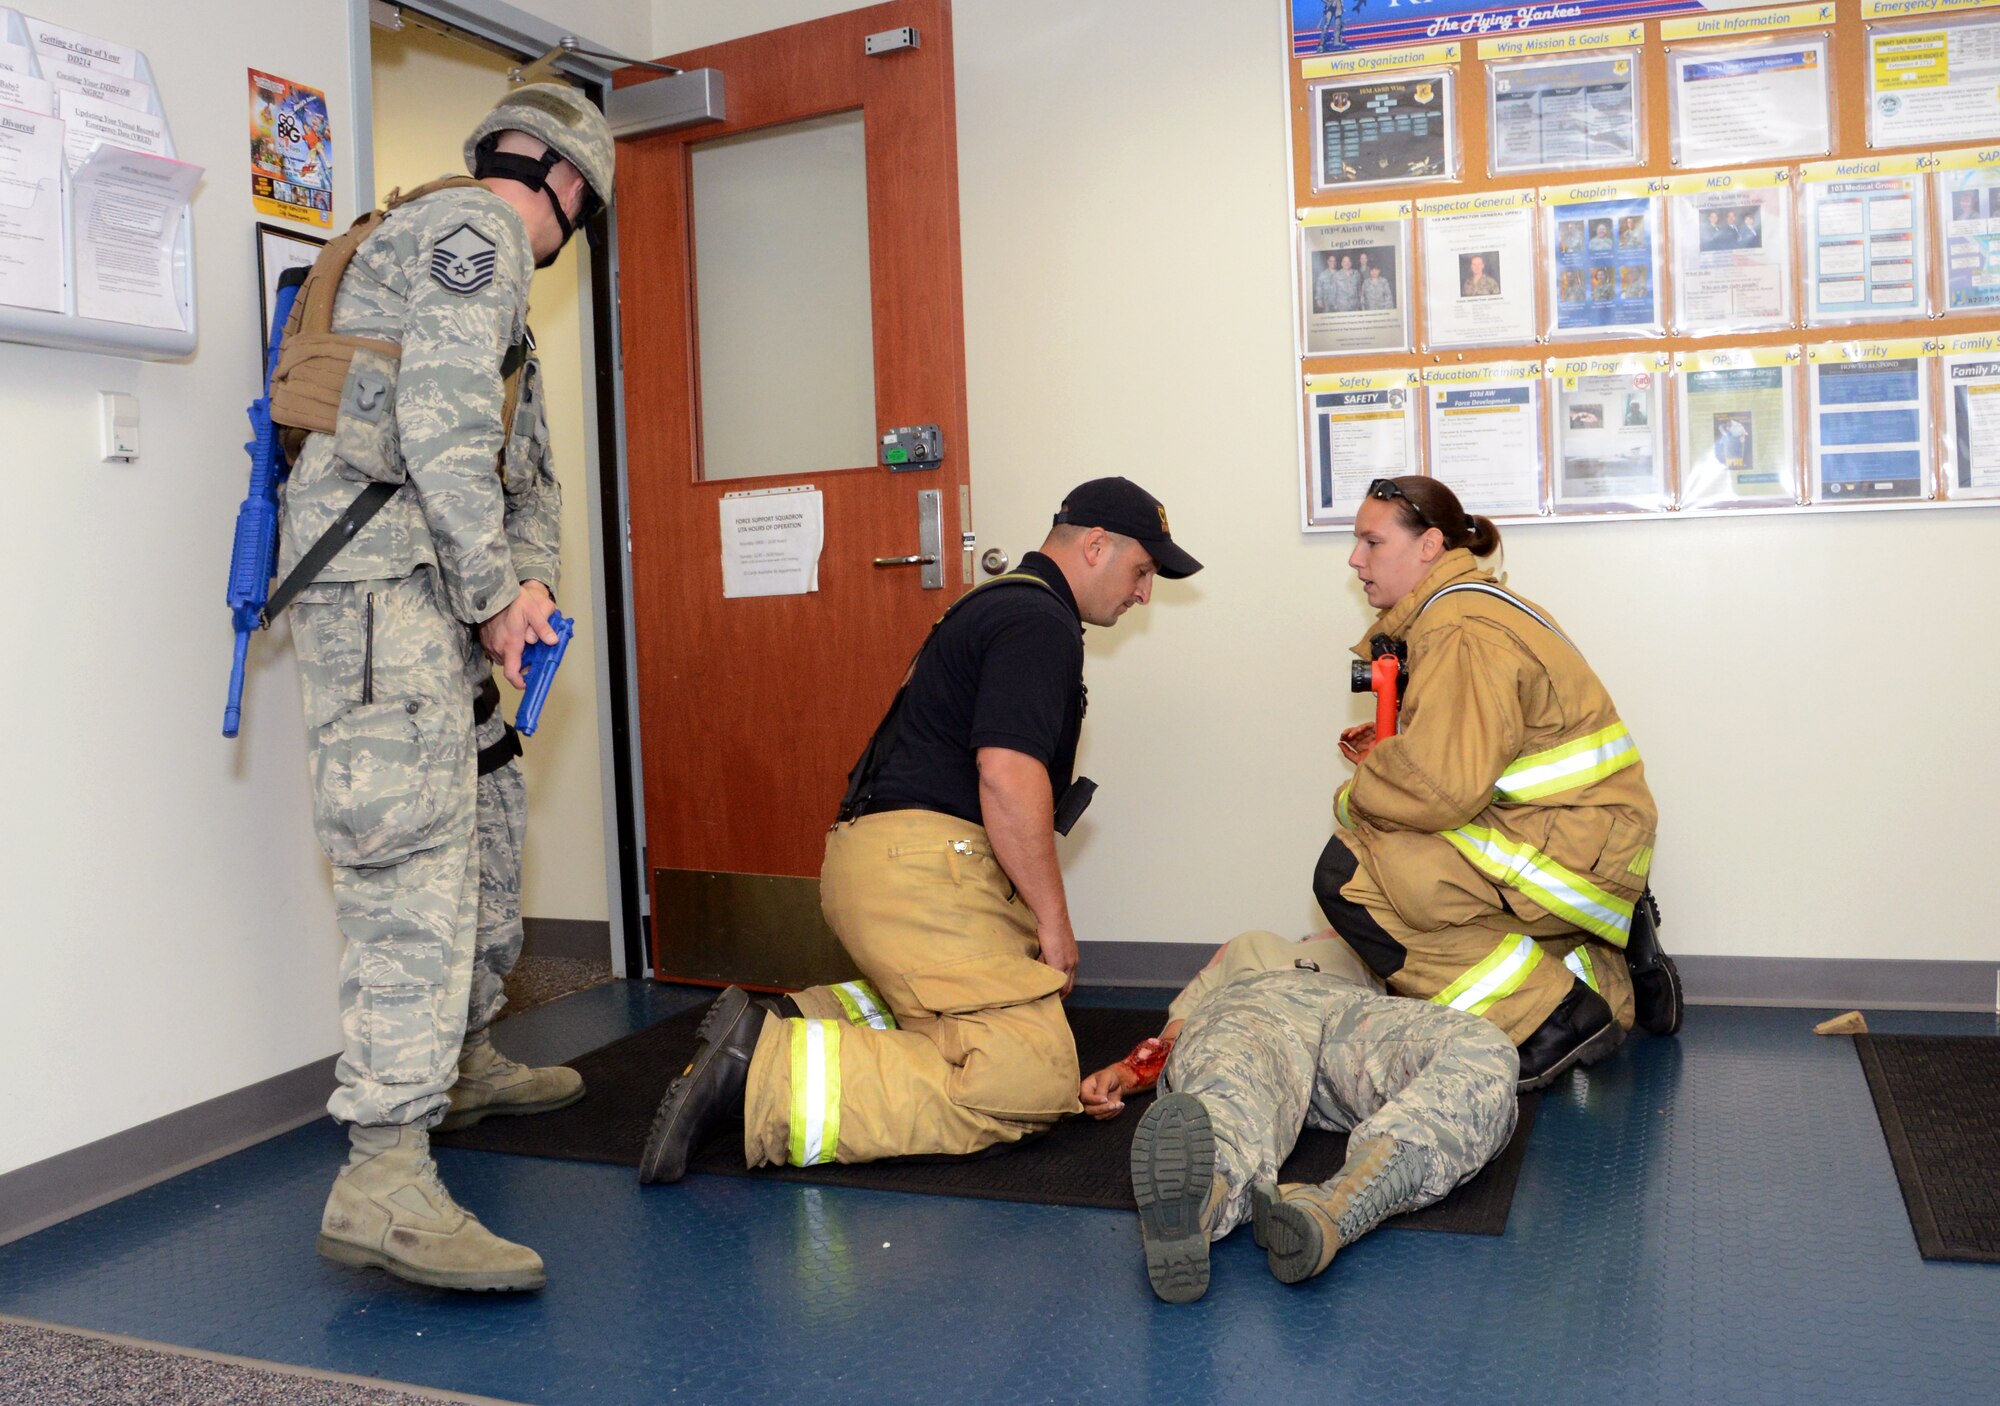 Howard Coro and Staff Sgt. Lisa Deskis, firefighters with the 103rd Civil Engineer Squadron, determine the best method of transport for Airman First Class Nathalie Jean-Louis who is depicted with simulated wounds during an active shooter exercise at Bradley Air National Guard Base in East Granby, Conn. on July 30, 2014. Master Sgt. Christopher Redo provides security for the firefighters as they tend to the wounded during the exercise. (U.S. Air National Guard photo by Tech. Sgt. Joshua Mead/Released)